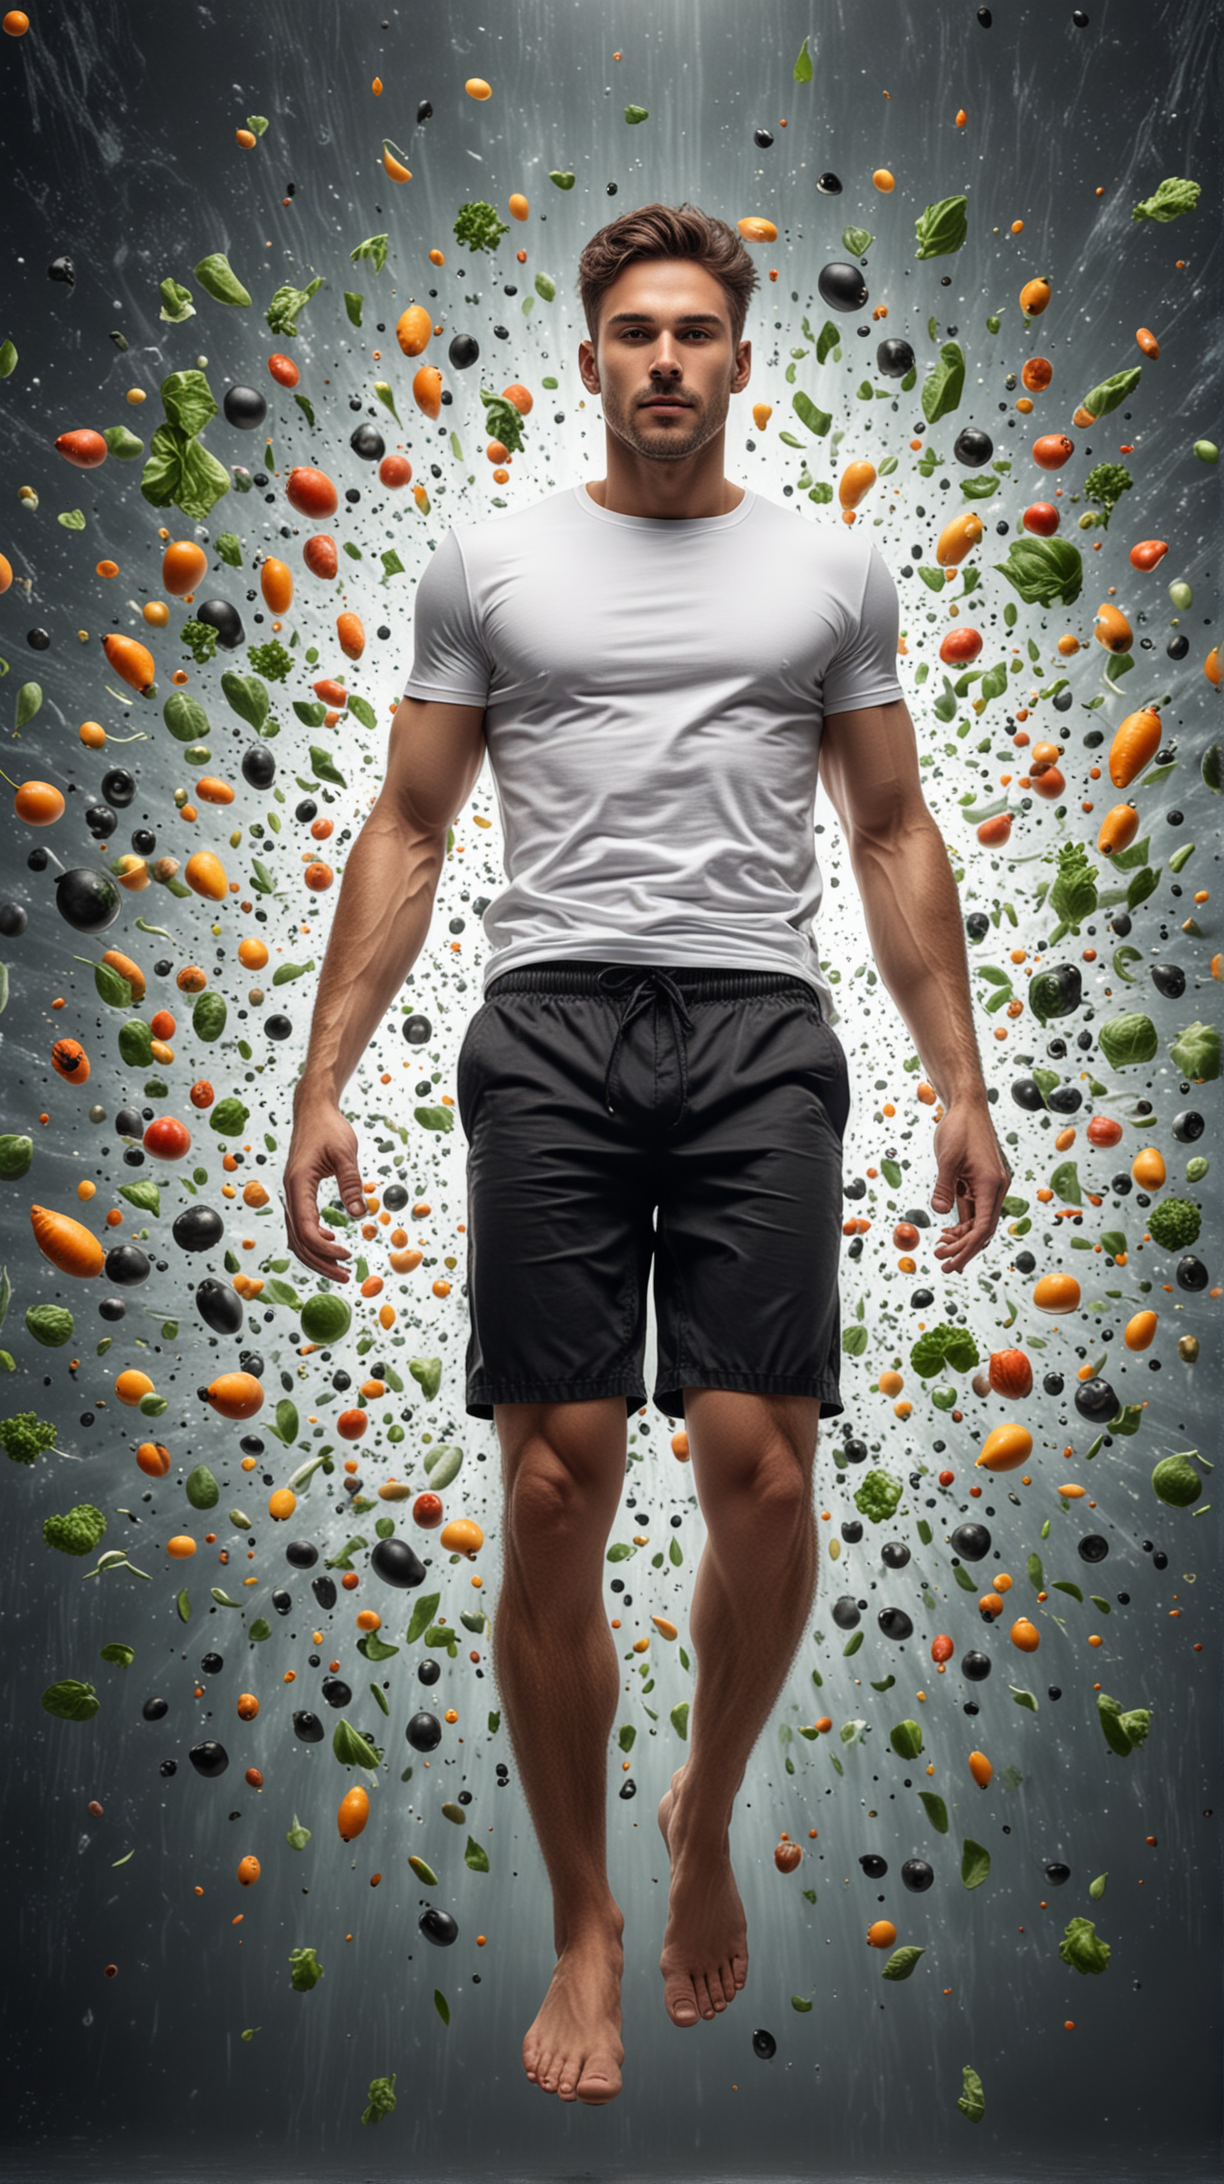 healthy man floating surrounded with nutrients floating, scientific image, the man is wearing white tshirt and black shorts, epic background, 4k, HDR, hyper realistic